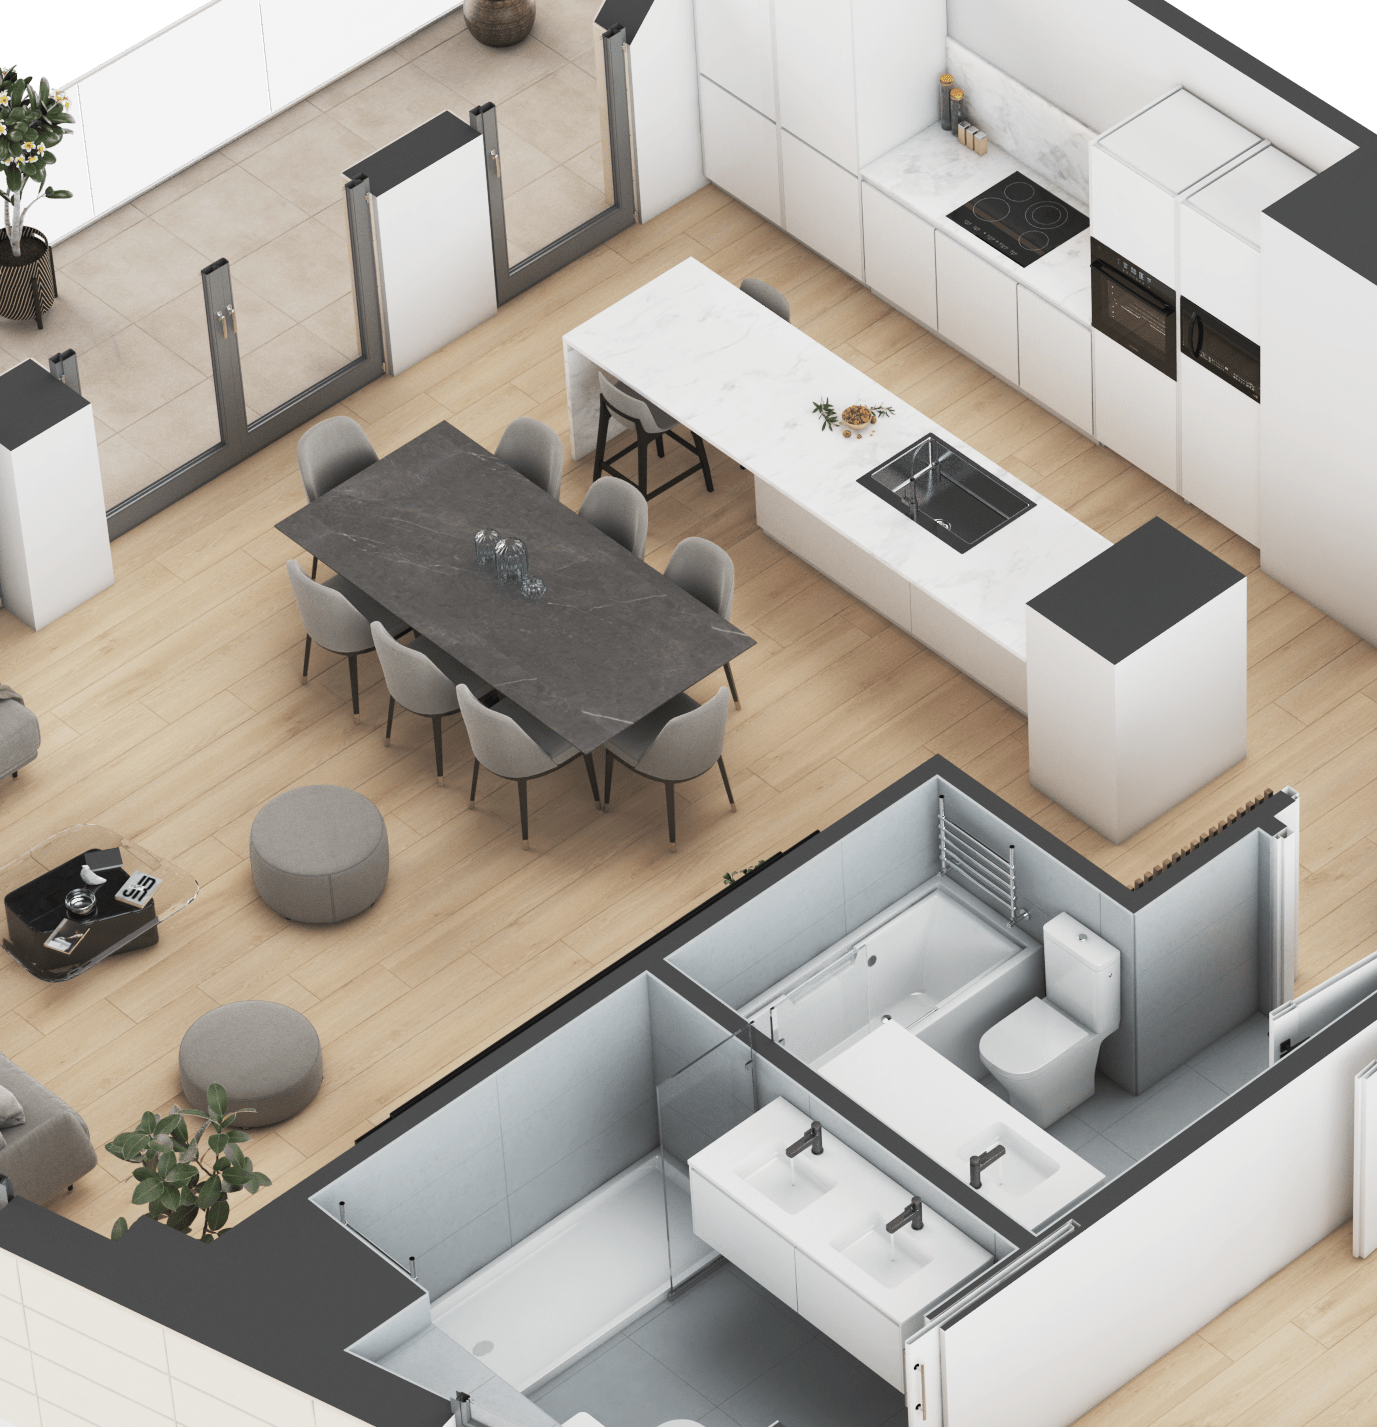 Architectural rendering of 3d model for a development company using 4 k rendering v ray and corona for high quality objects and 3 day delivery for 300$